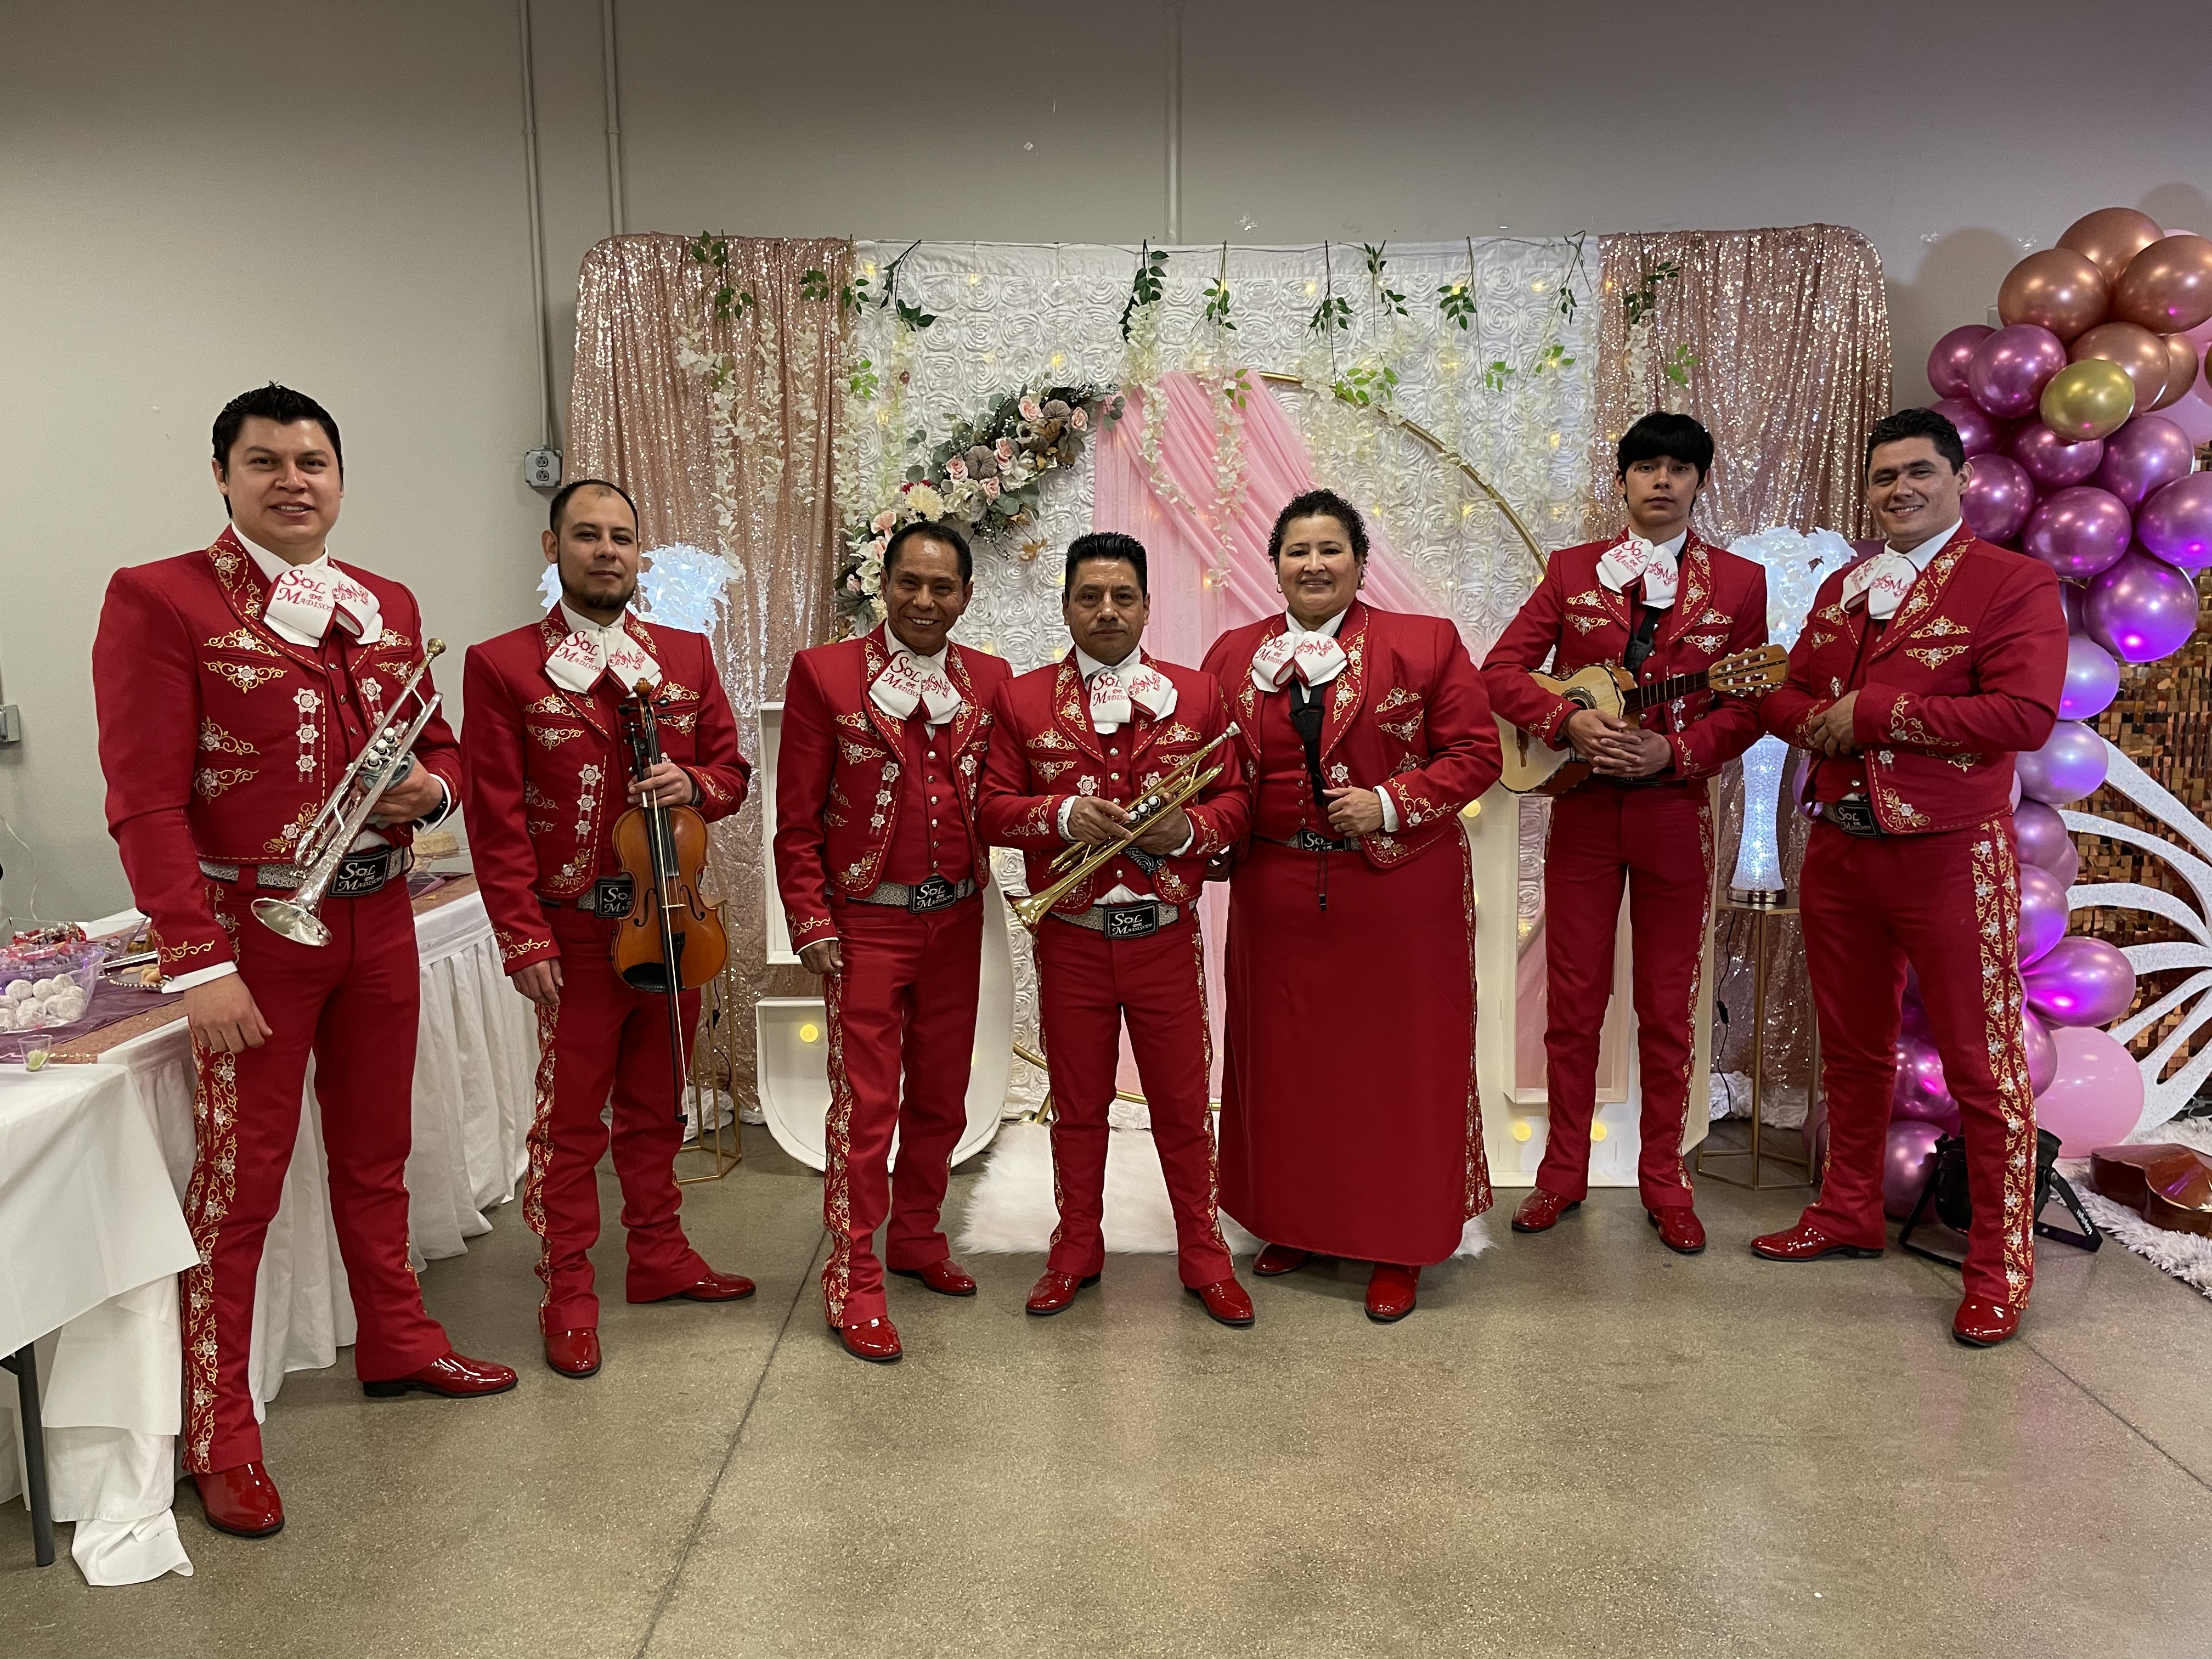 Mariachi Sol de Madison for the Latine Music and Dance Festival in Dane County Libraries hosted by Beyond the Page